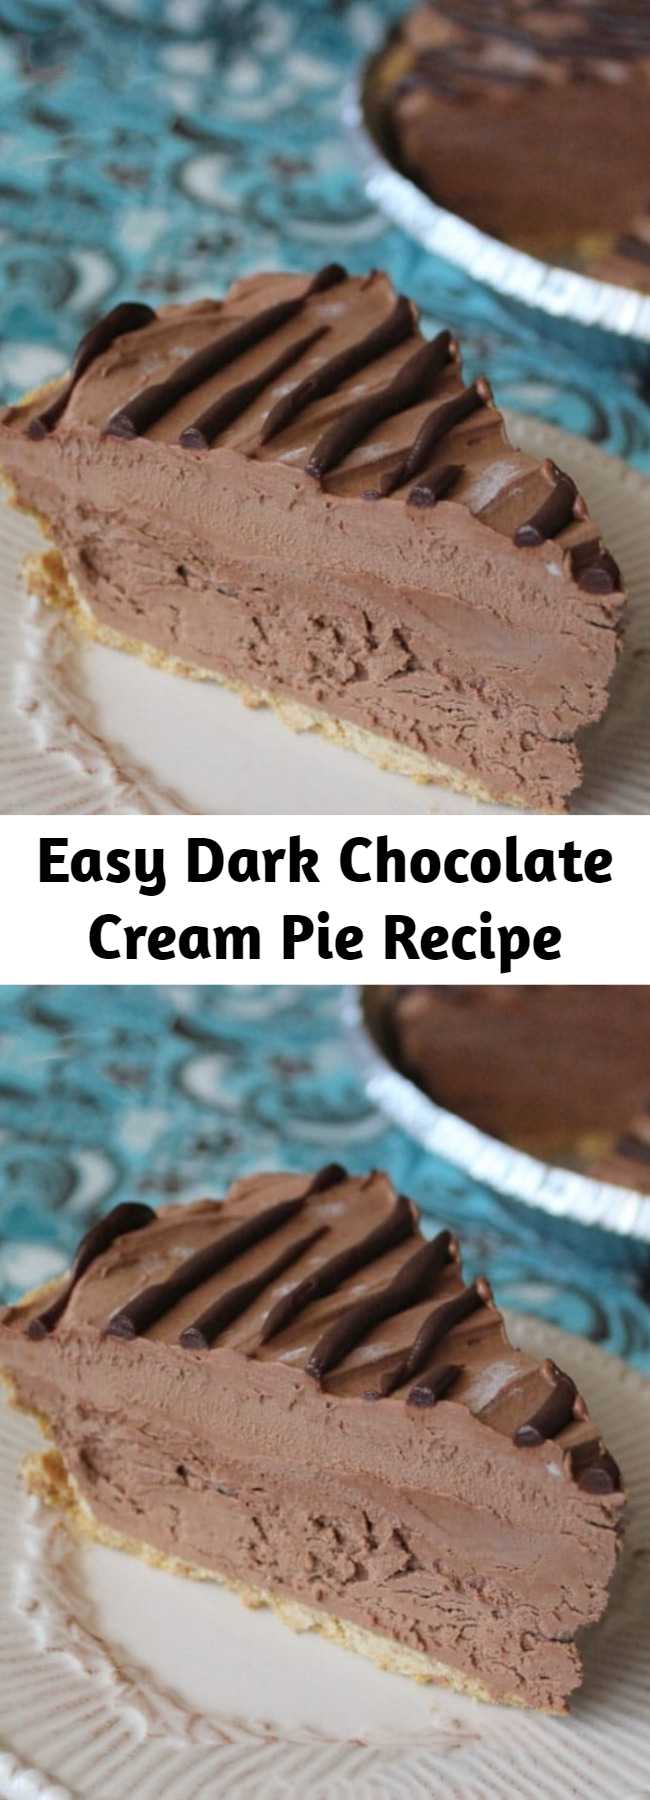 Easy Dark Chocolate Cream Pie Recipe - Dark Chocolate Cream Pie-don’t let the lighter color fool you, this pie has all the rich flavor of dark chocolate in a creamy, cool pie!